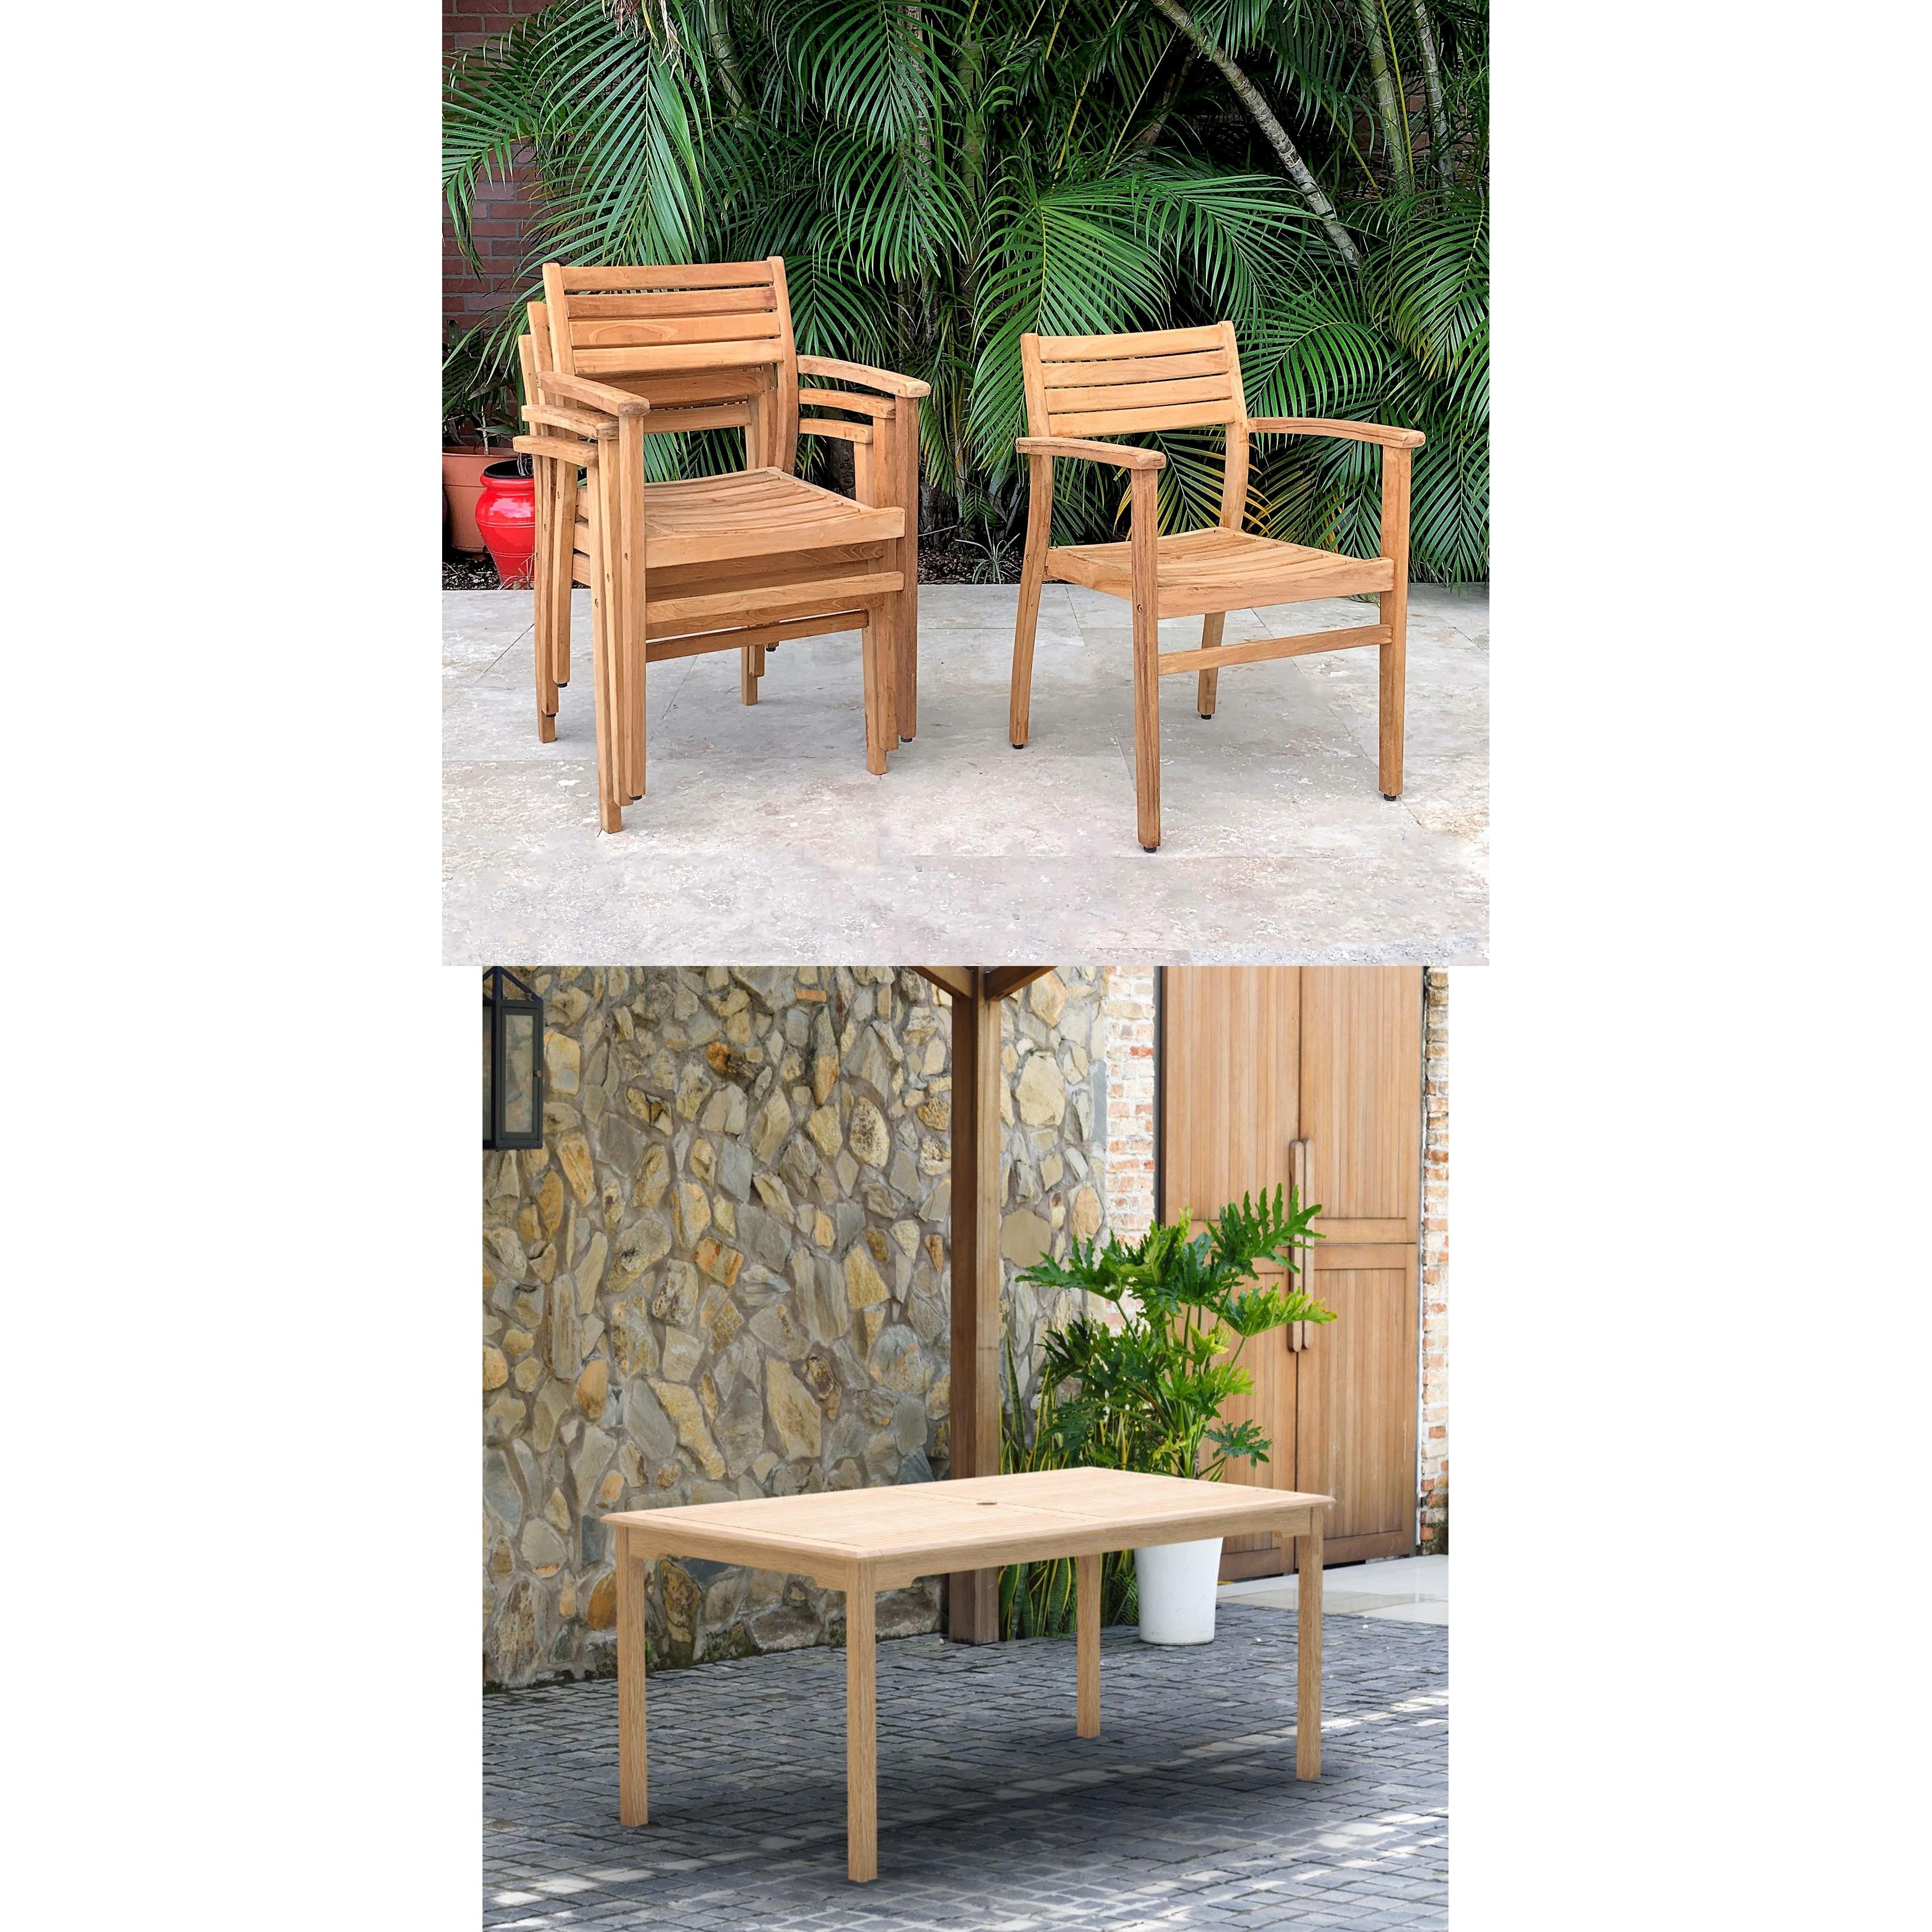 Clanfield Teak Wood 5-Piece Patio Dining Set with Stacking Armchairs - image 1 of 3